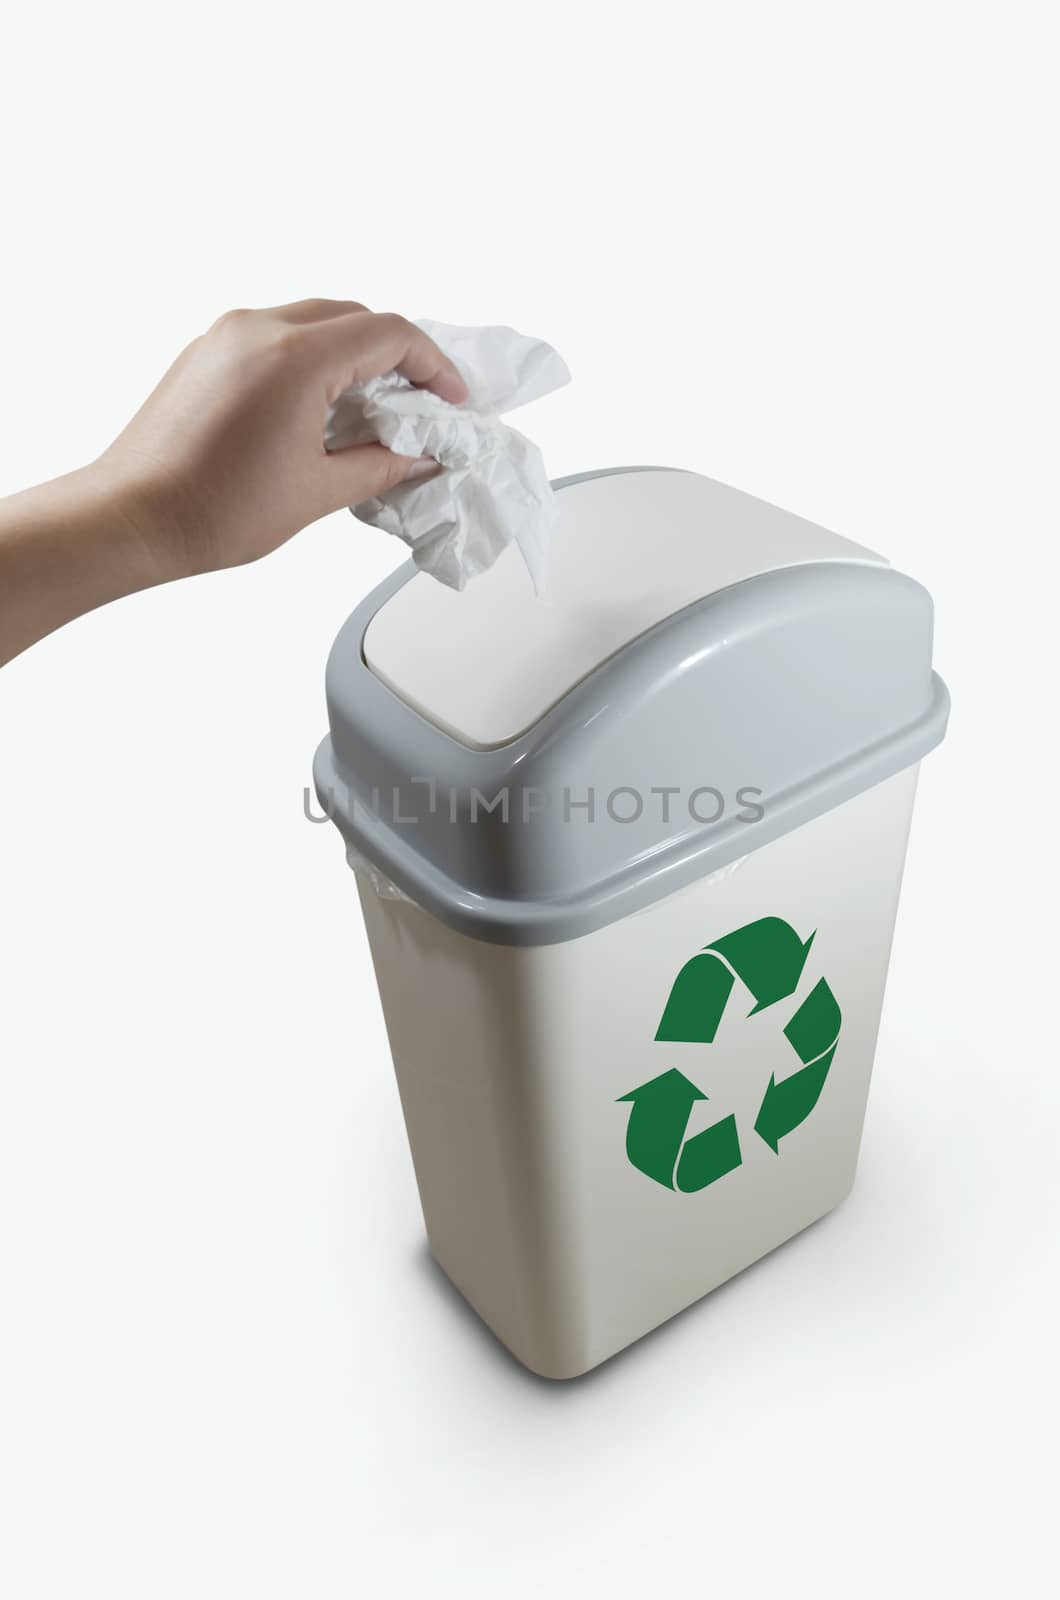 hand putting a paper garbage into recycling bin by furuoda